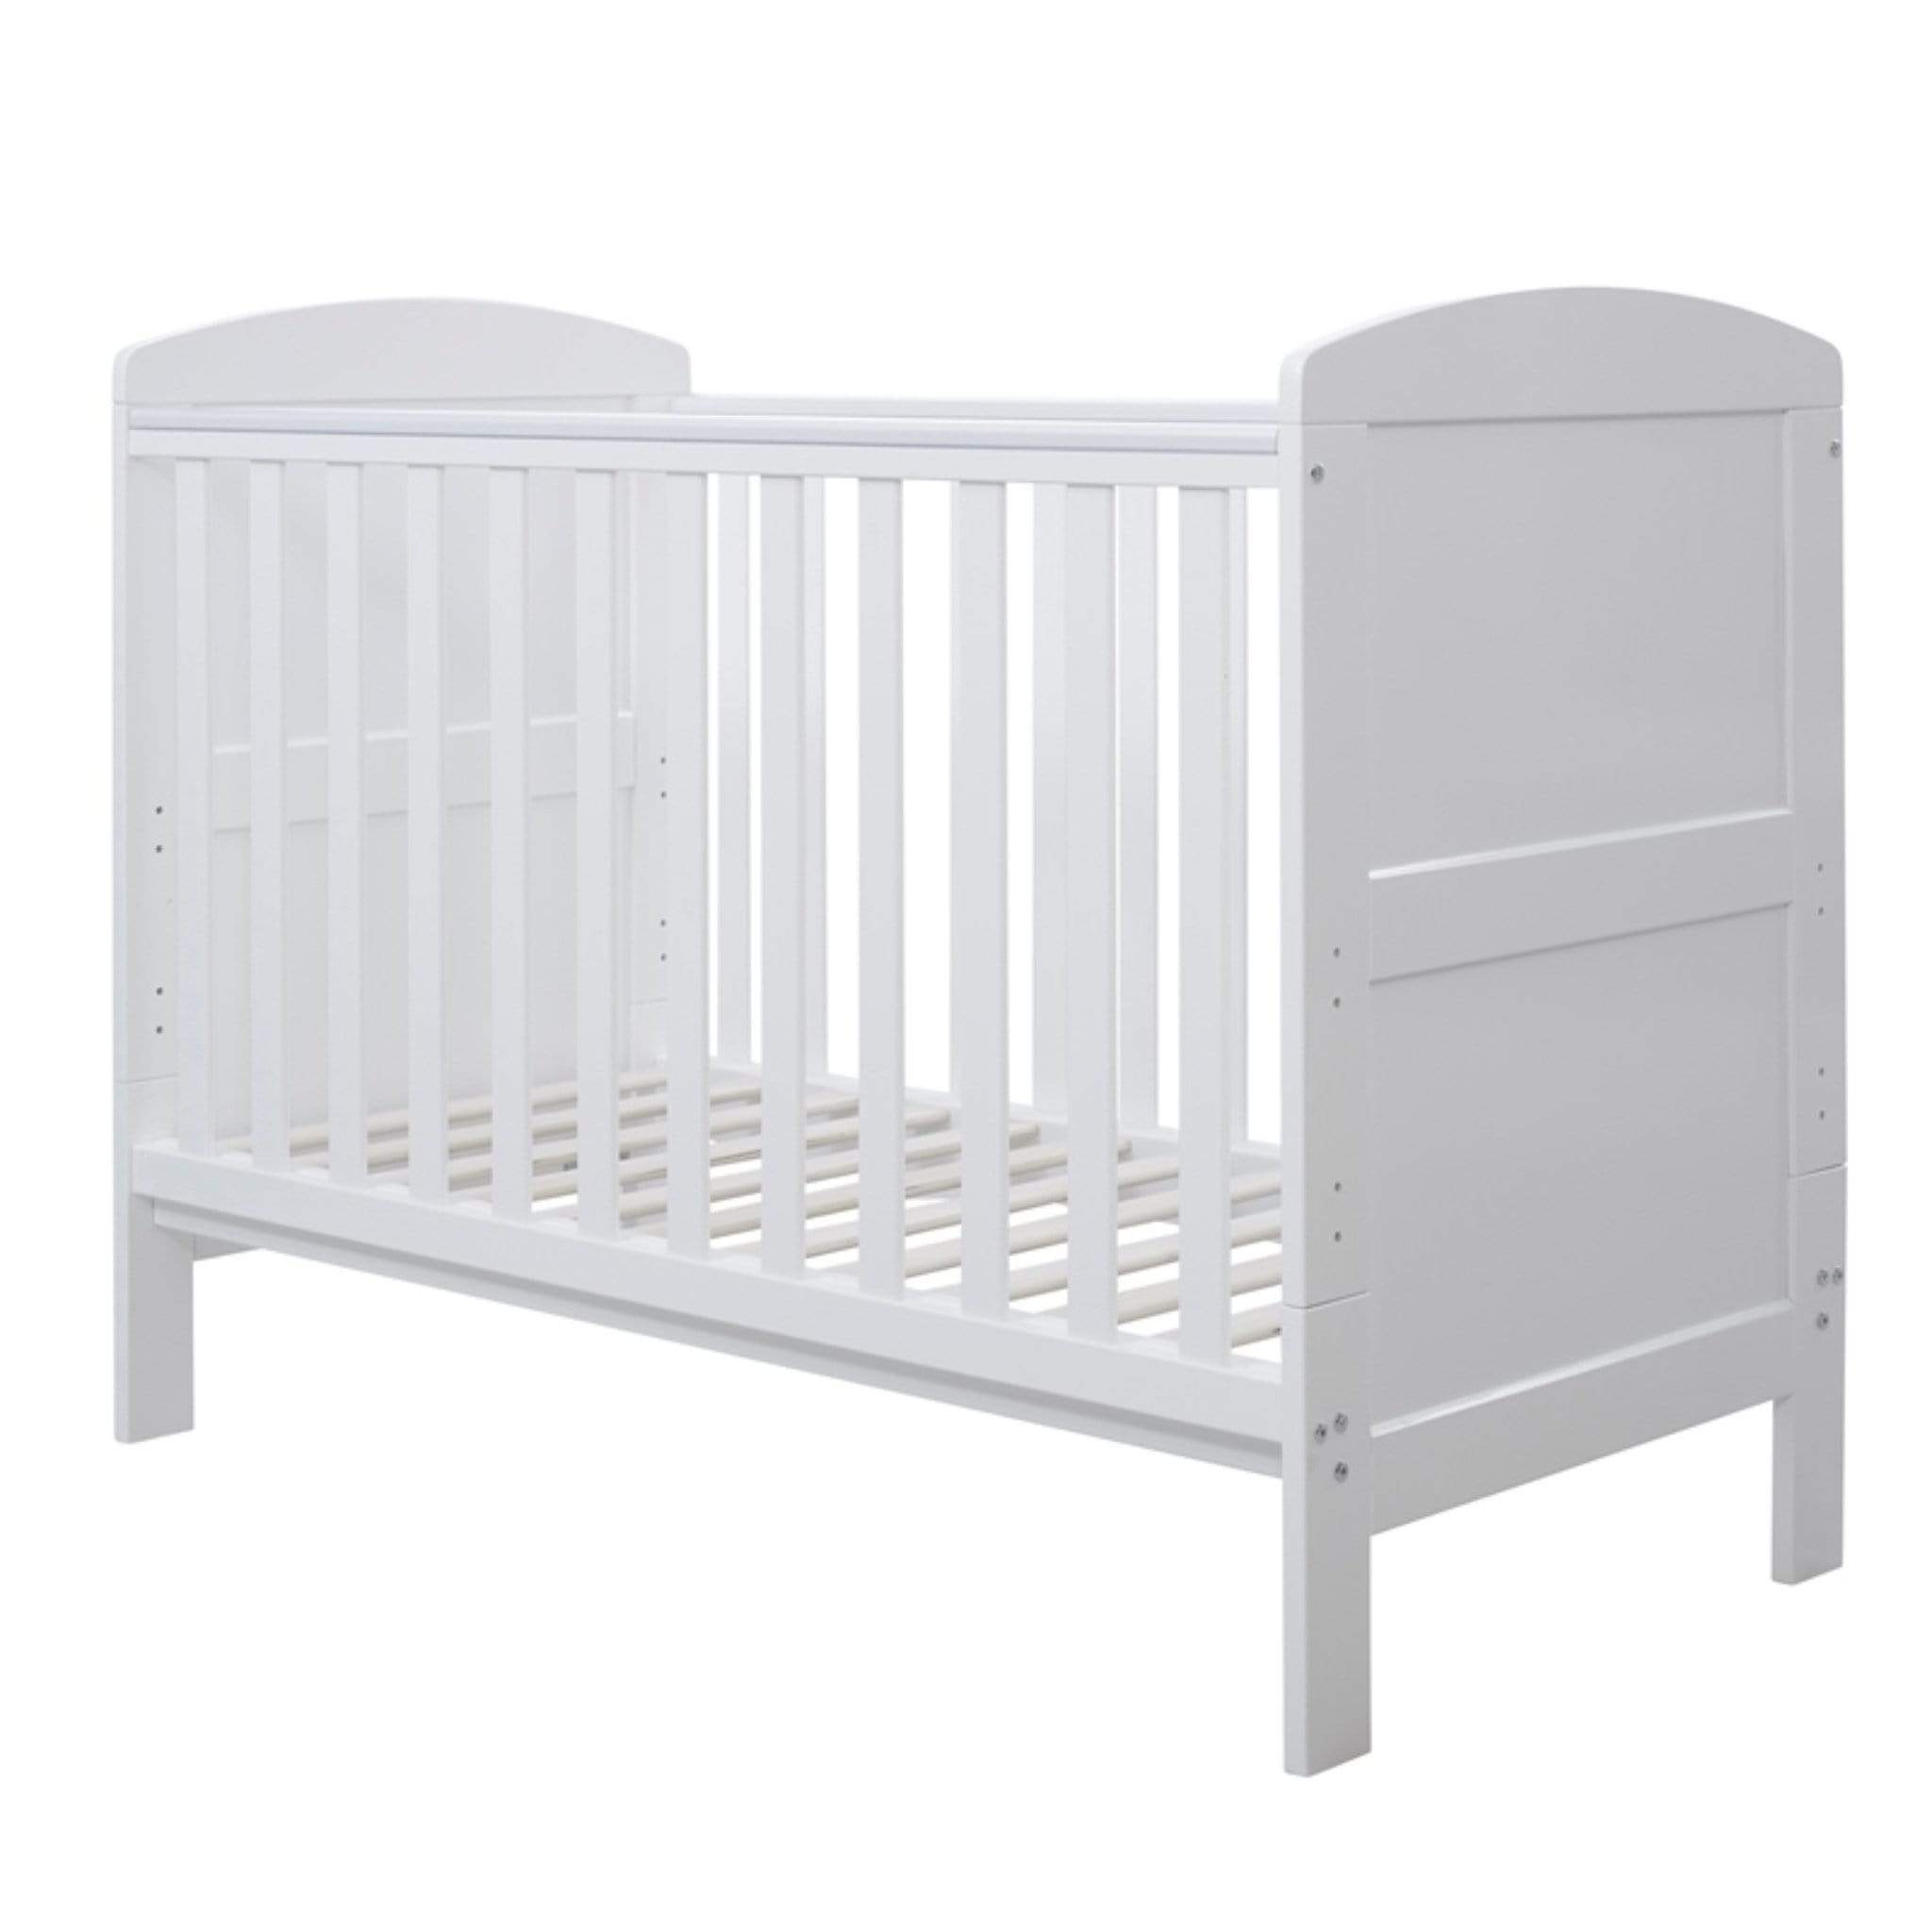 Ickle Bubba Cot Beds Ickle Bubba Coleby Mini Cot Bed White 43-001-000-801